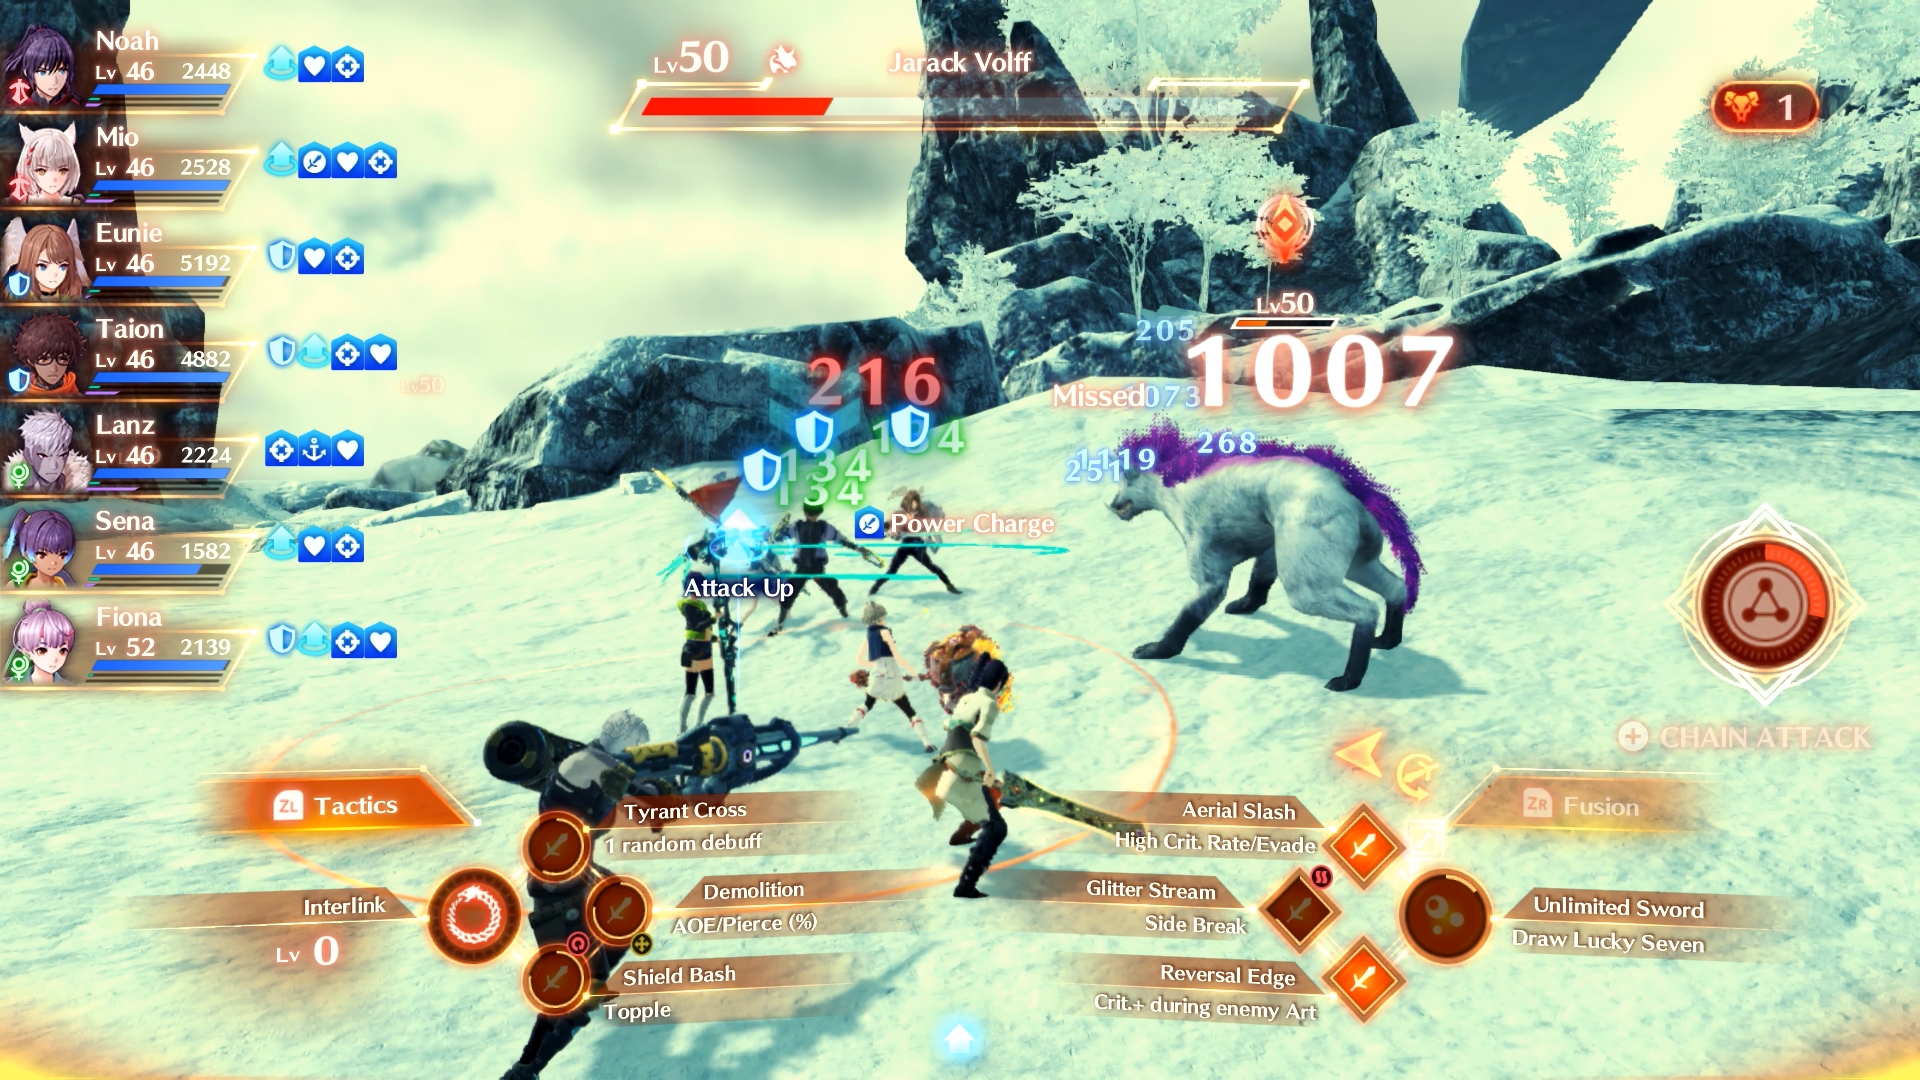 Xenoblade Chronicles 3 preview: Monolith Soft's ambition on full